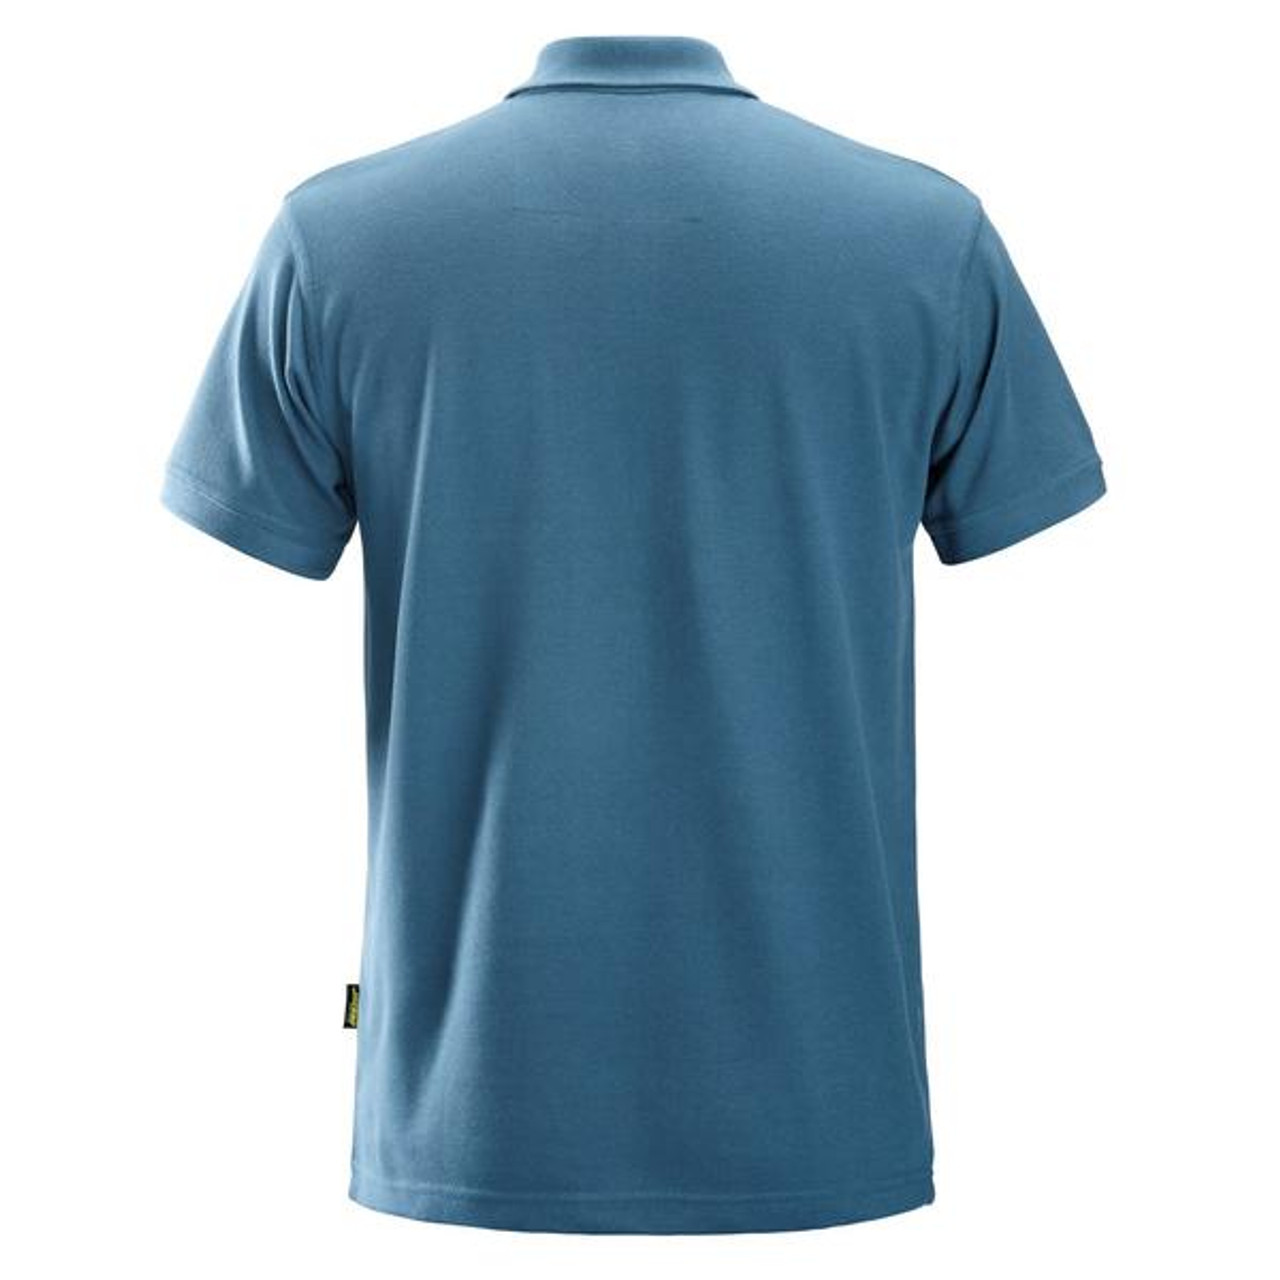 SNICKERS Polo Shirt | Melbourne Supplier of 2708 Ocean Blue Classic for Work Shirts, Uniforms on Demand, Branded Workwear, Work Uniforms and Heat Transfers